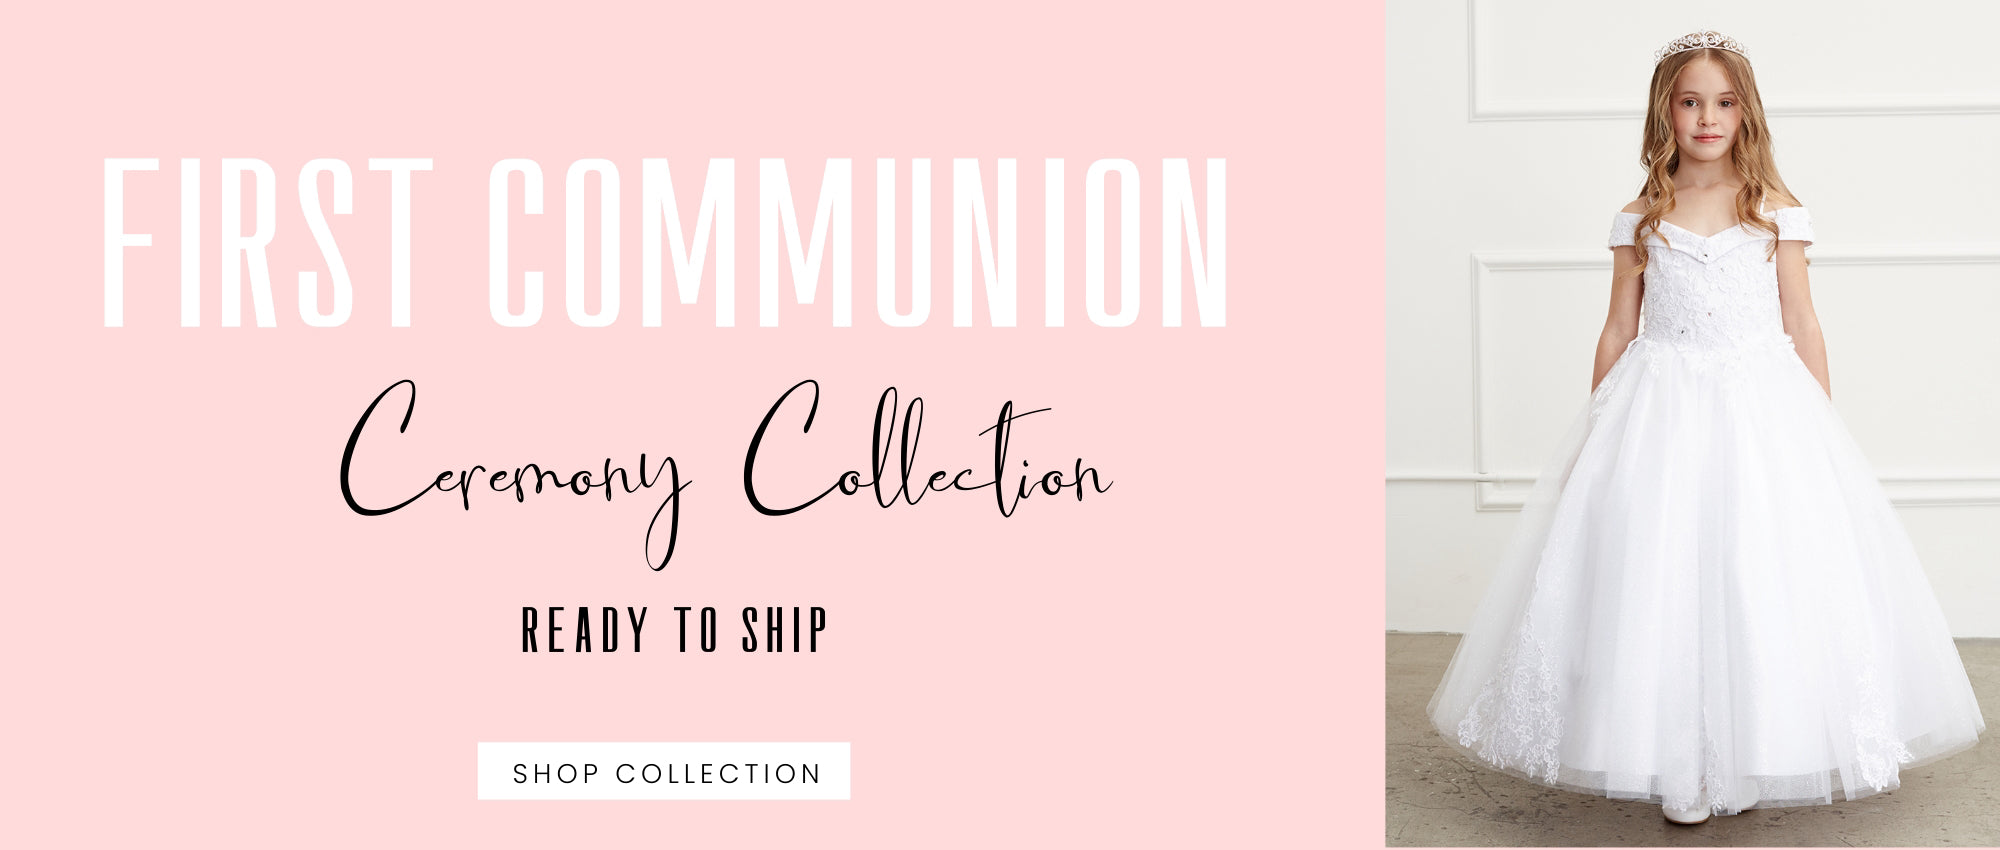 First Communion – Sparkly Gowns